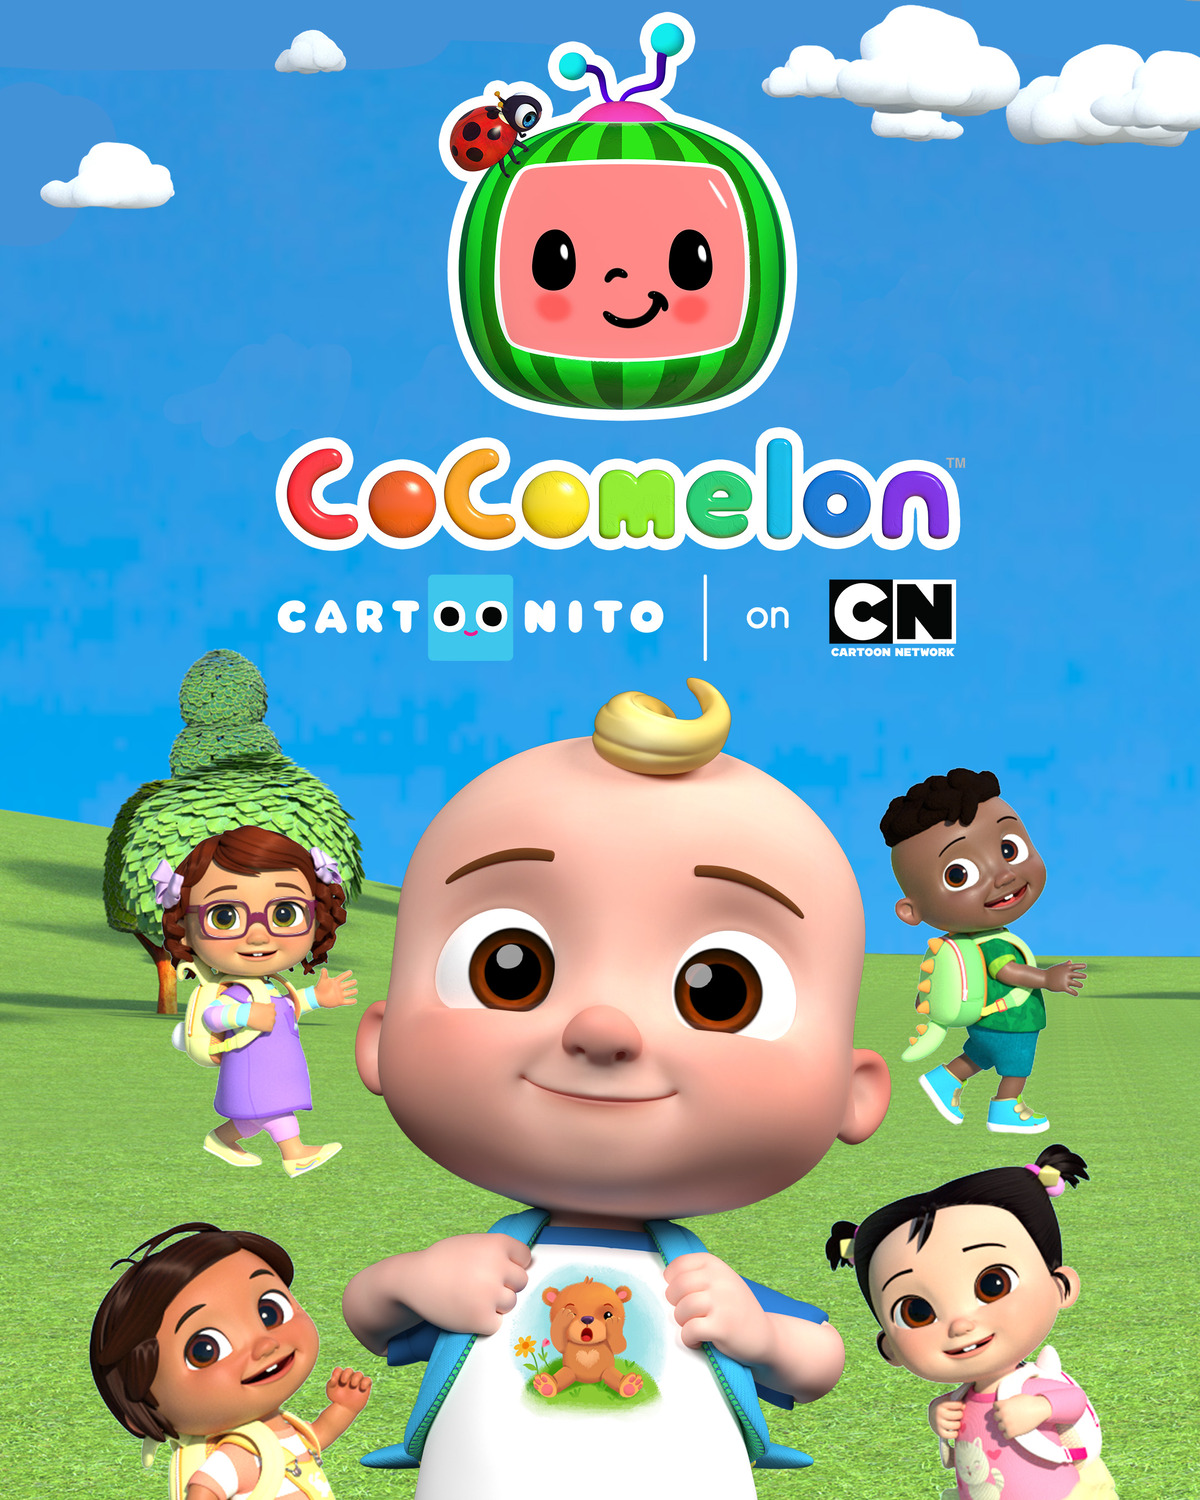 Extra Large TV Poster Image for Cocomelon 